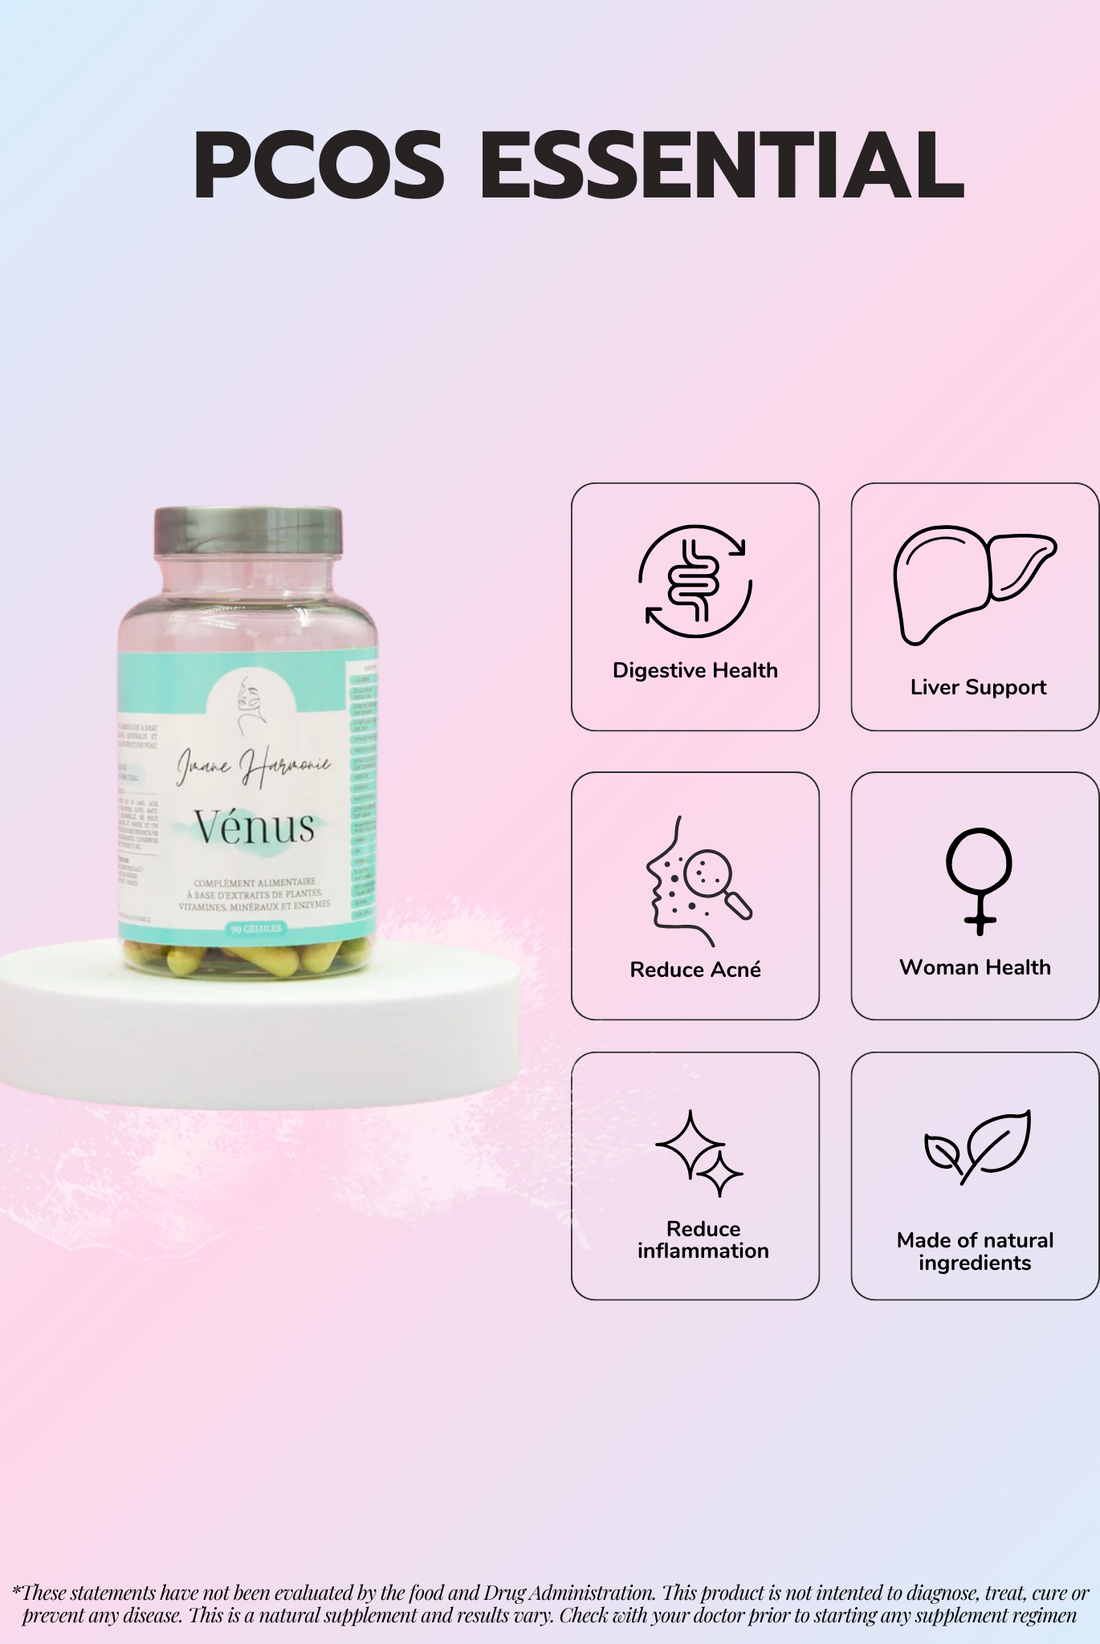 Features of vénus supplements : Digestive health, liver support, reduce acné, woman health, reduce inflammation, made of natural ingredients